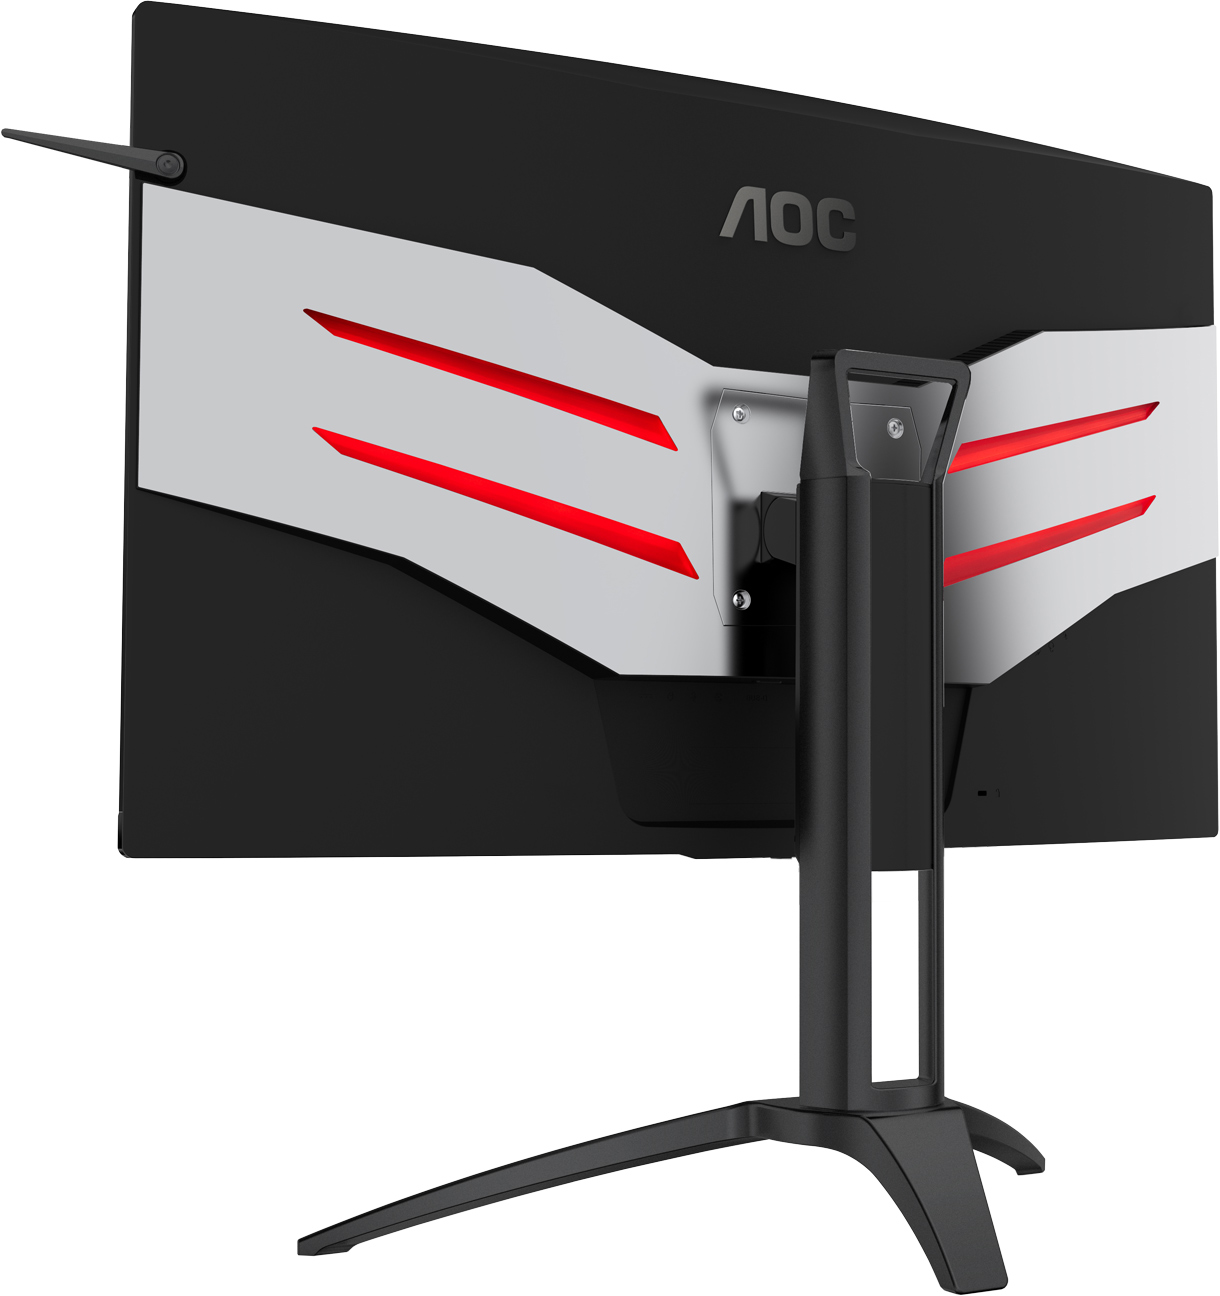 Aoc Announces Agon Ag322qc4 32 Inch Curved Lcd With Freesync 2 Displayhdr 400